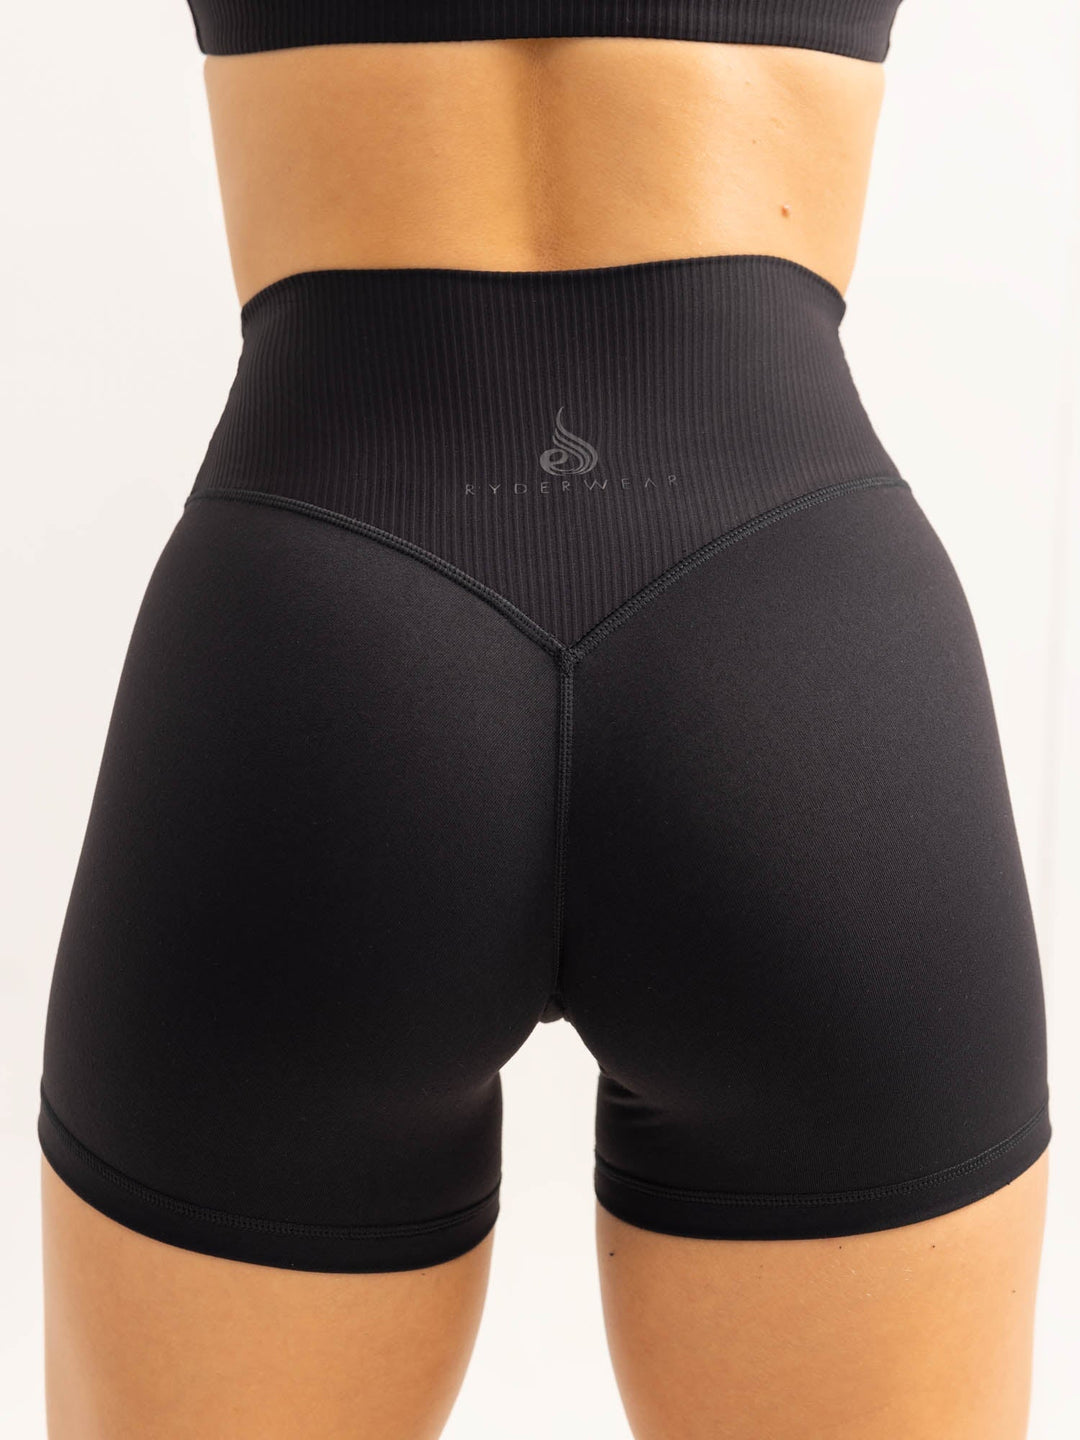 Activate High Waisted Shorts - Black Clothing Ryderwear 